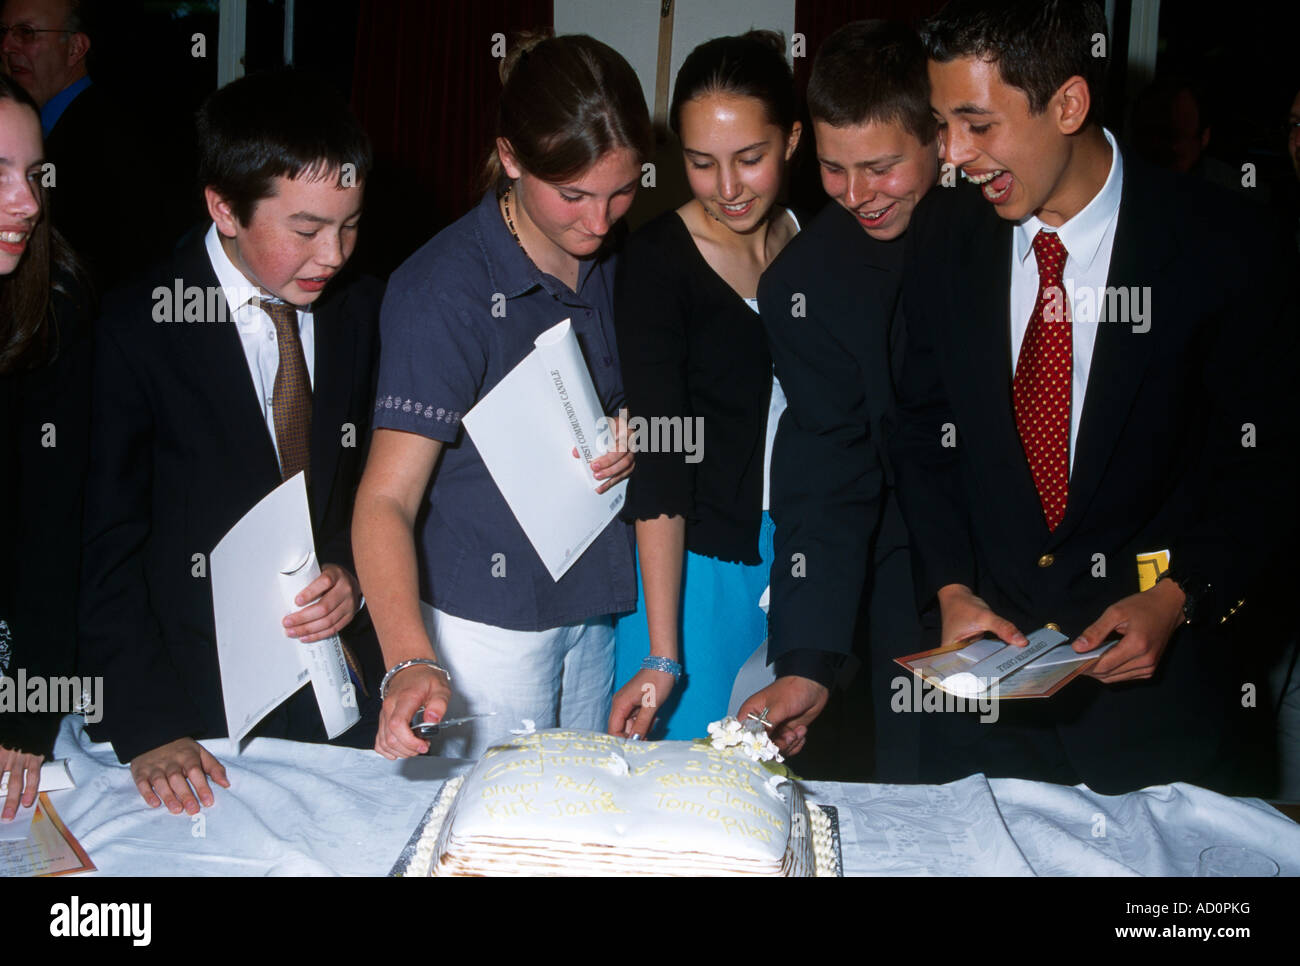 Celebrating Confirmation Young People Cutting Cake Together - Joy Stock Photo